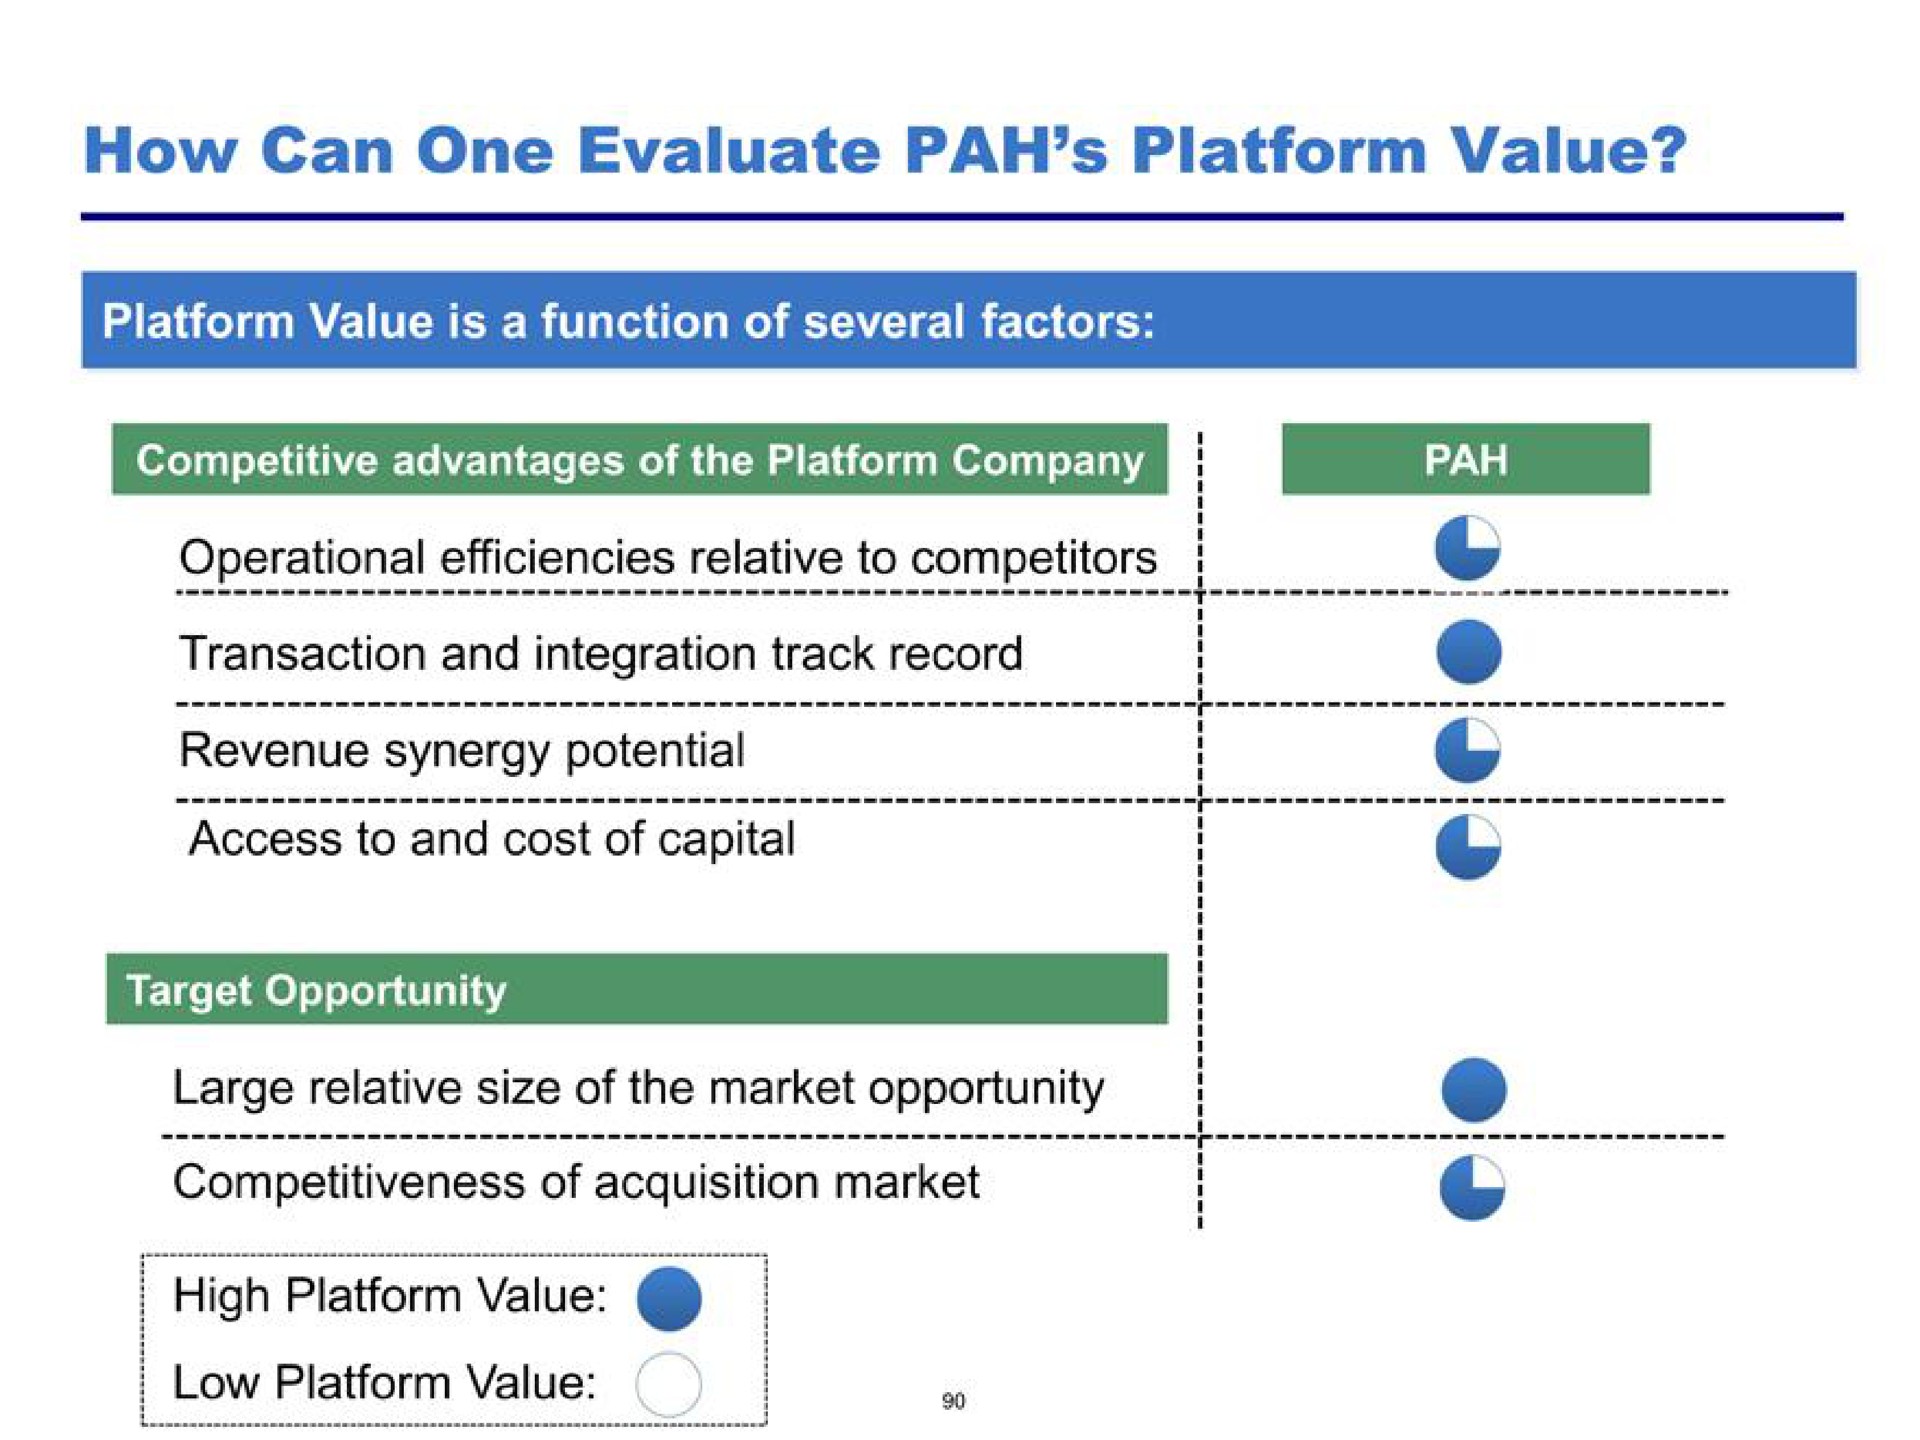 how can one evaluate pah platform value high platform value | Pershing Square